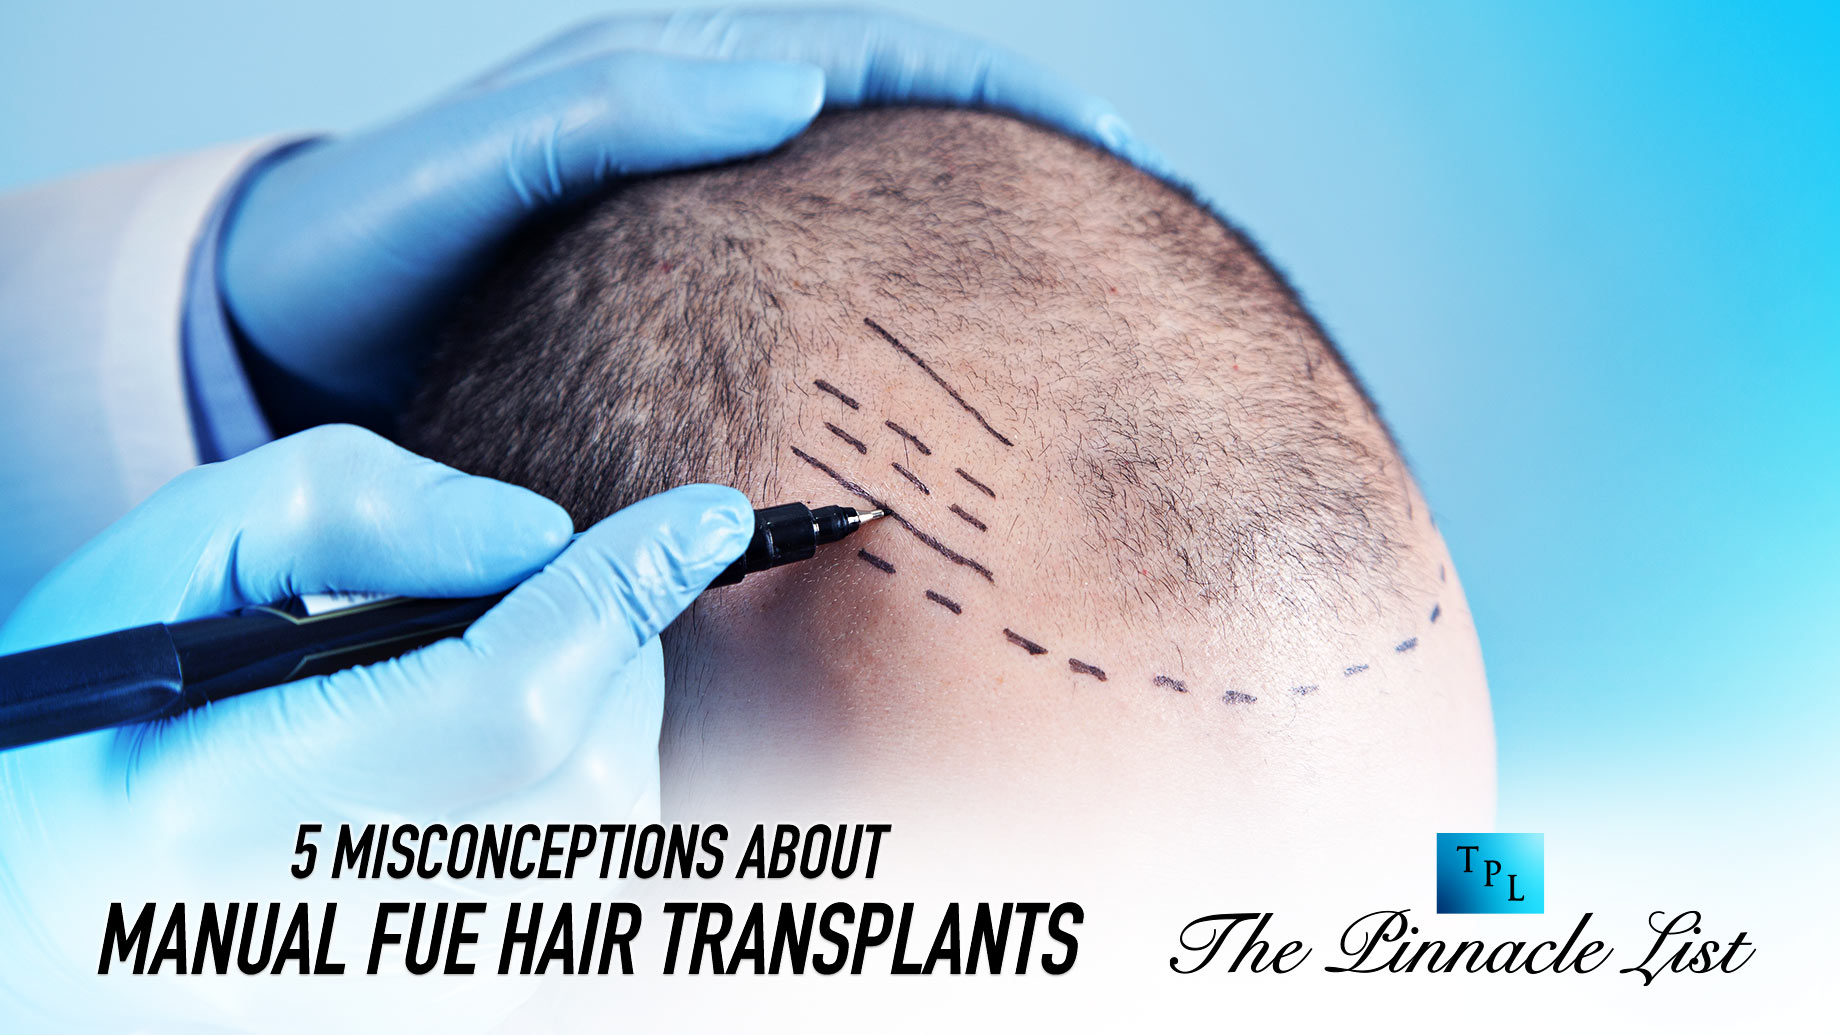 5 Misconceptions About Manual FUE Hair Transplants